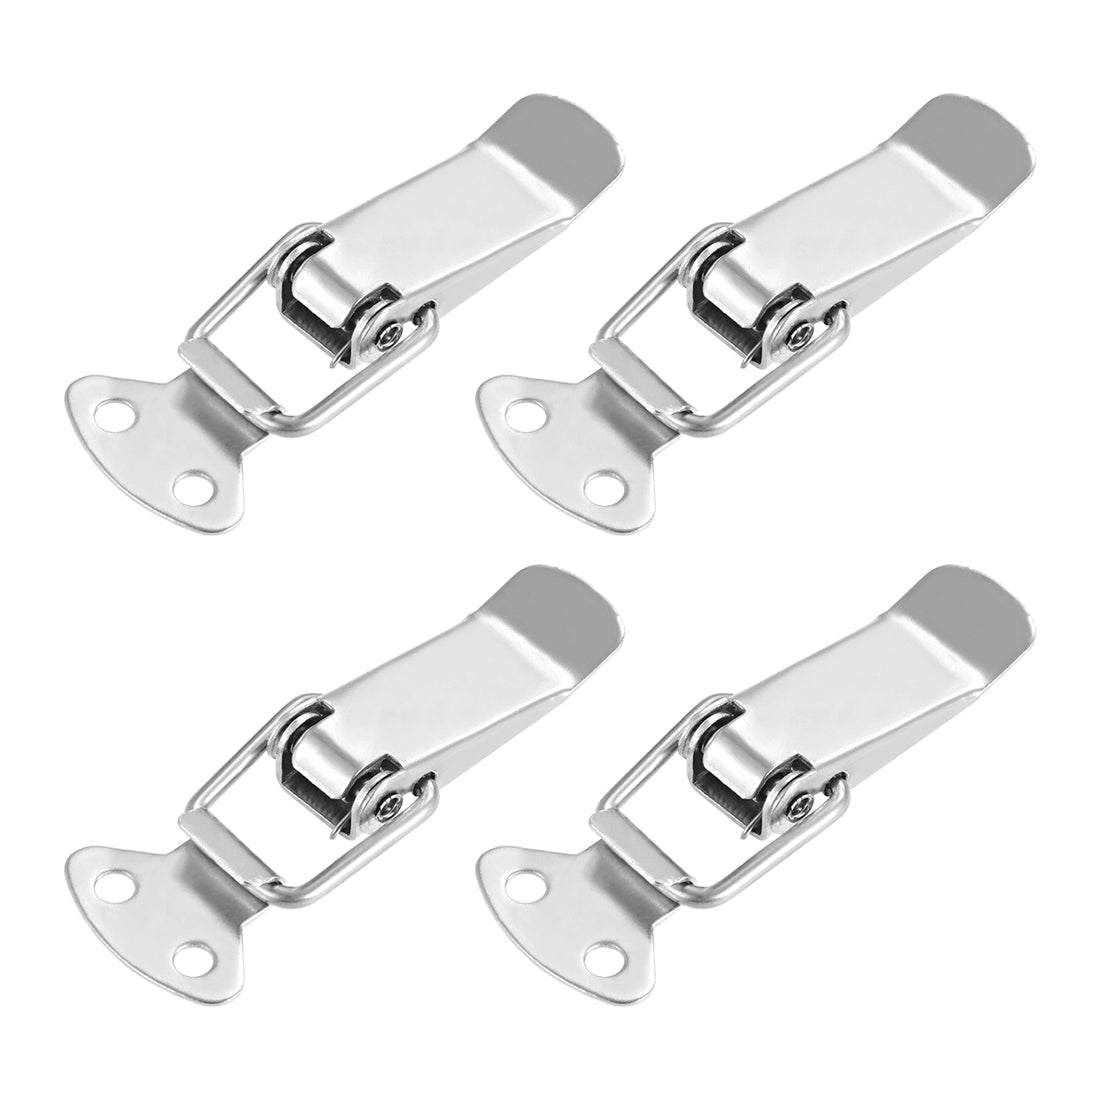 uxcell Uxcell 304 Stainless Steel Spring Loaded Toggle Case Box Crate Trunk Latch Catches Clamp Hasps 4 pcs, 72mm Overall Length